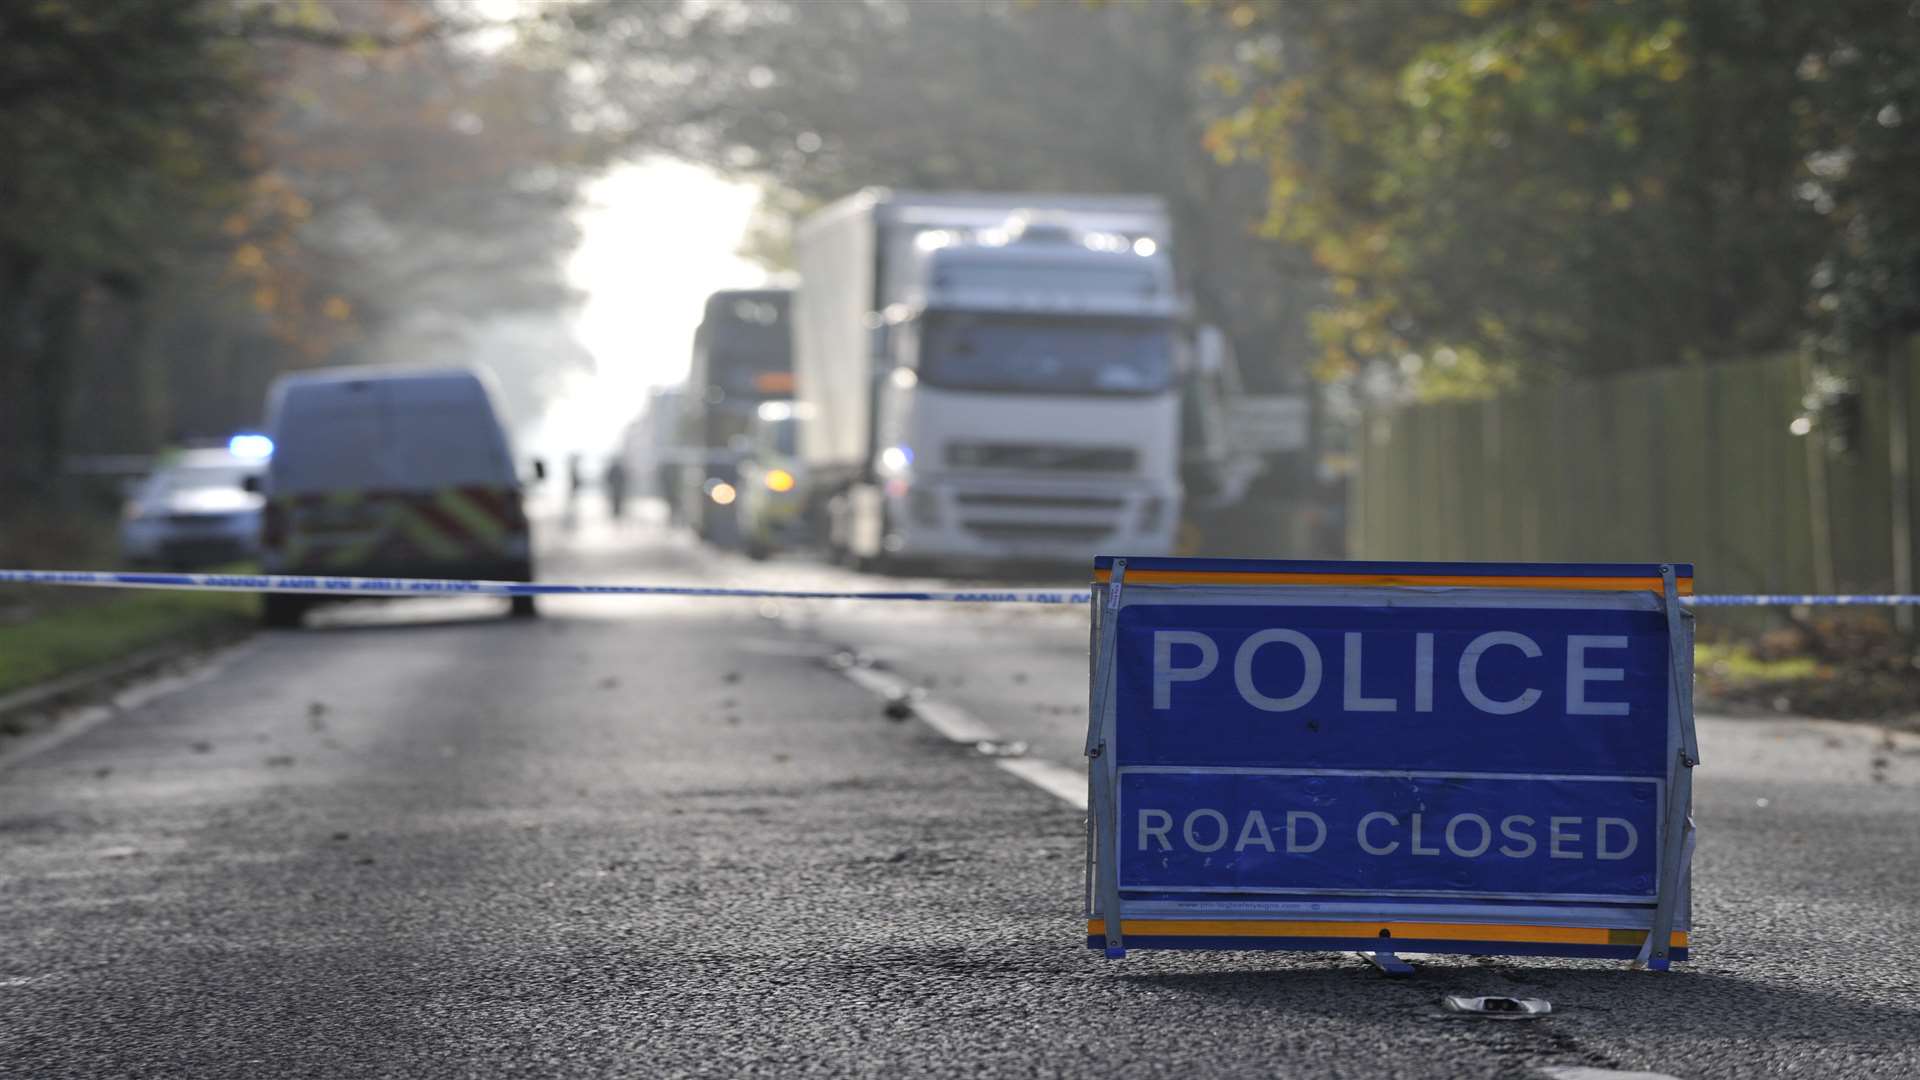 Police closed the road after the incident